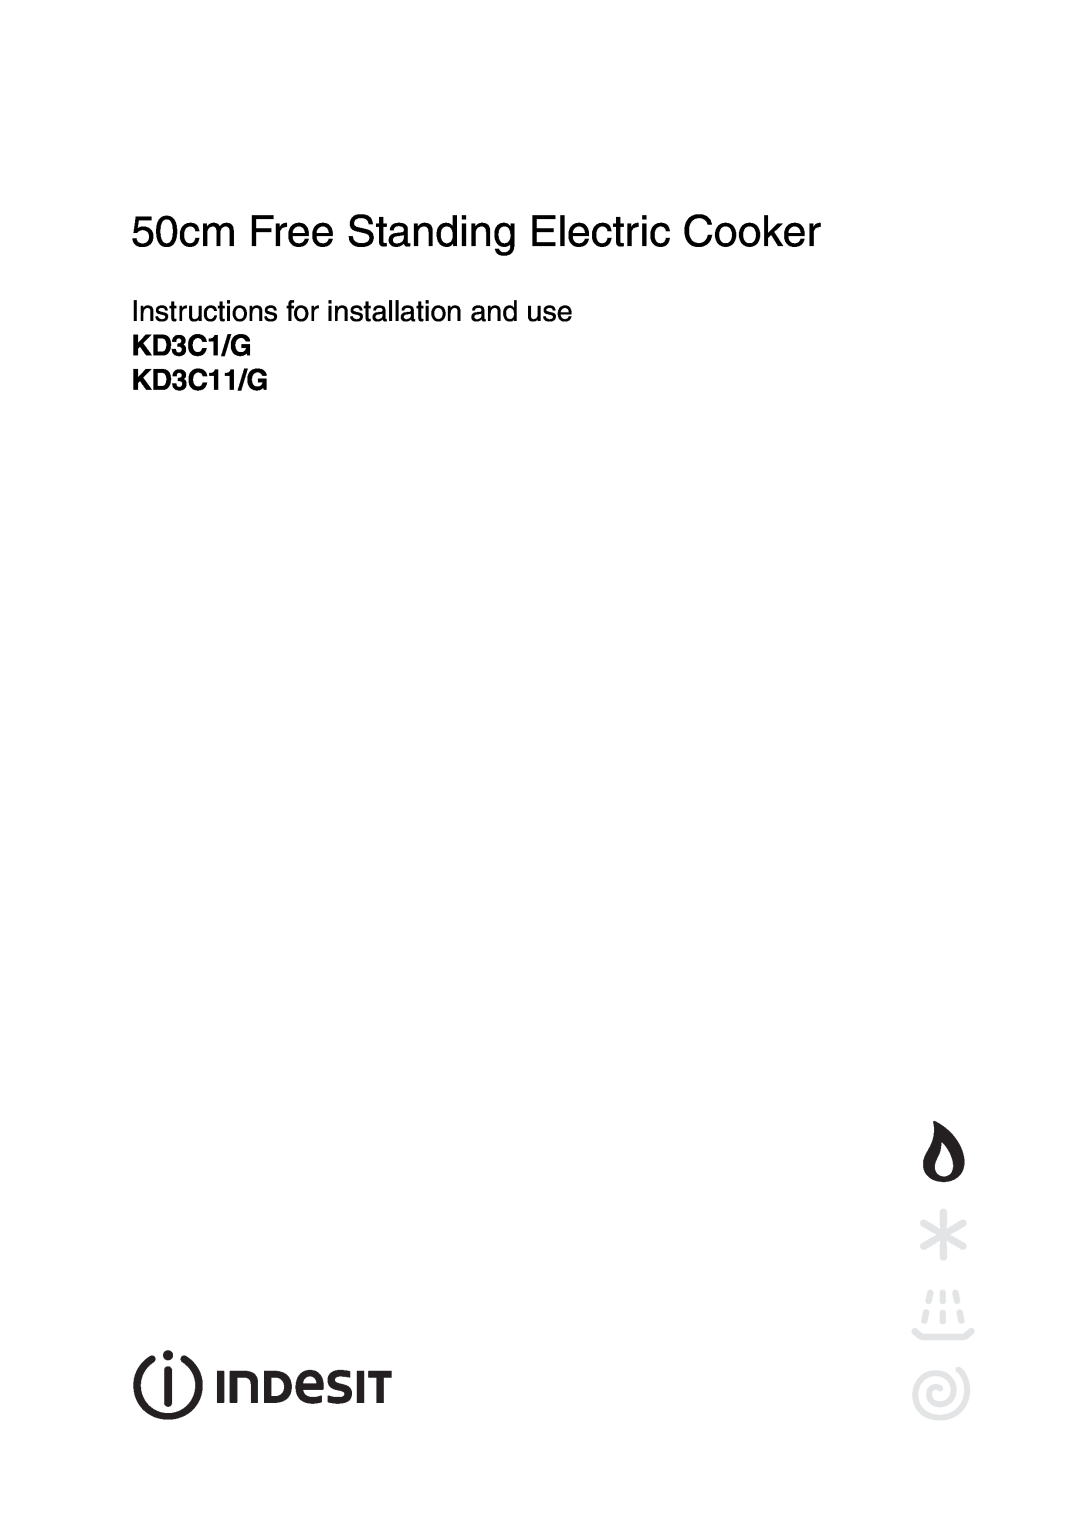 Indesit manual 50cm Free Standing Electric Cooker, Instructions for installation and use, KD3C1/G KD3C11/G 